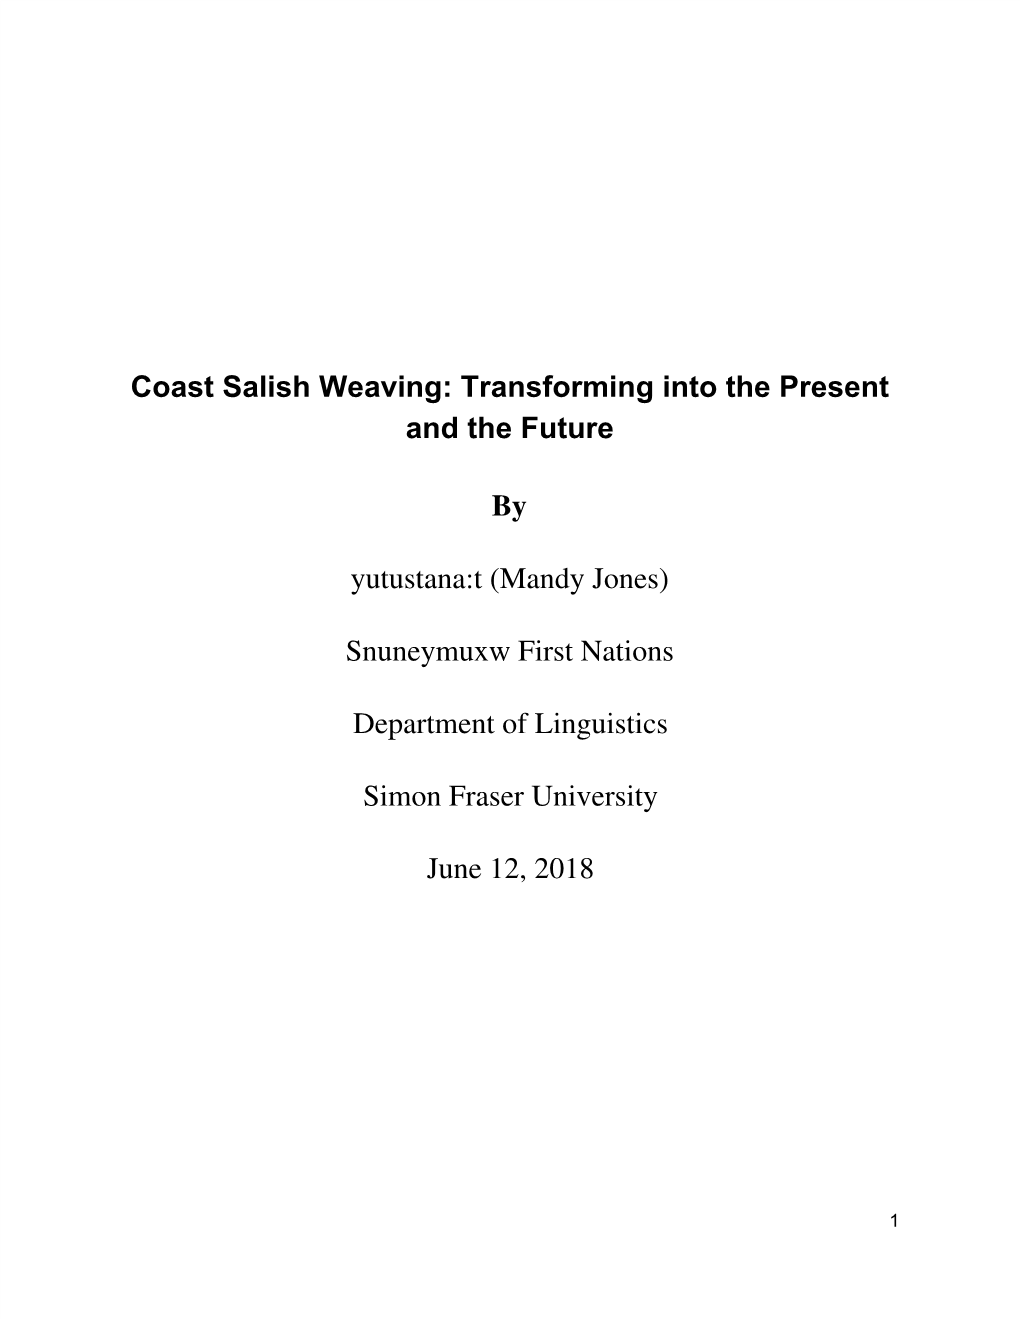 Coast Salish Weaving: Transforming Into the Present and the Future